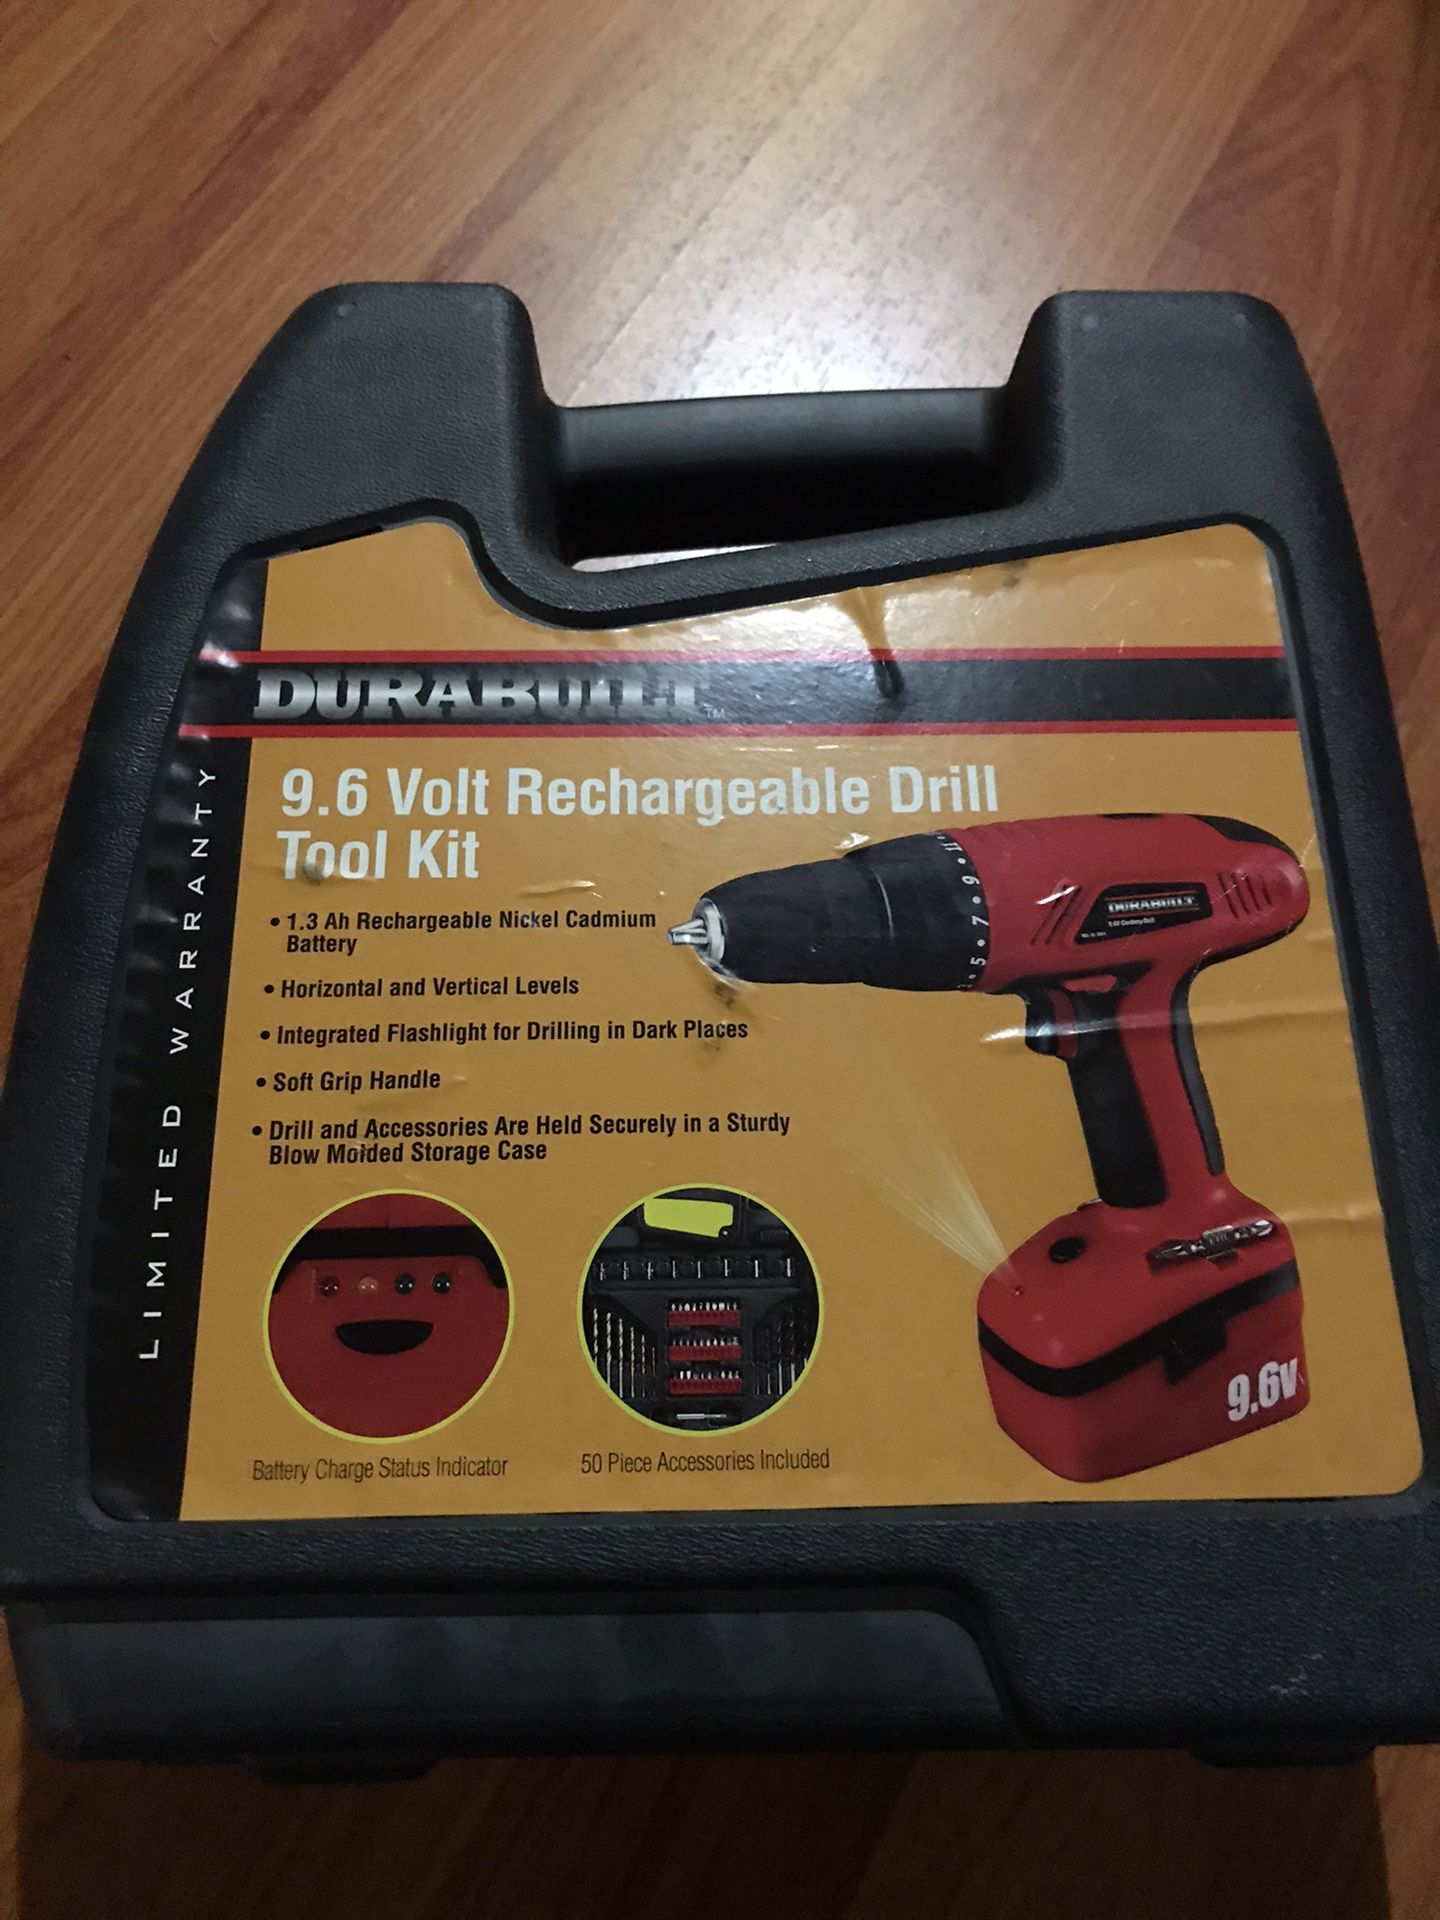 Durabuilt rechargeable drill tool kit